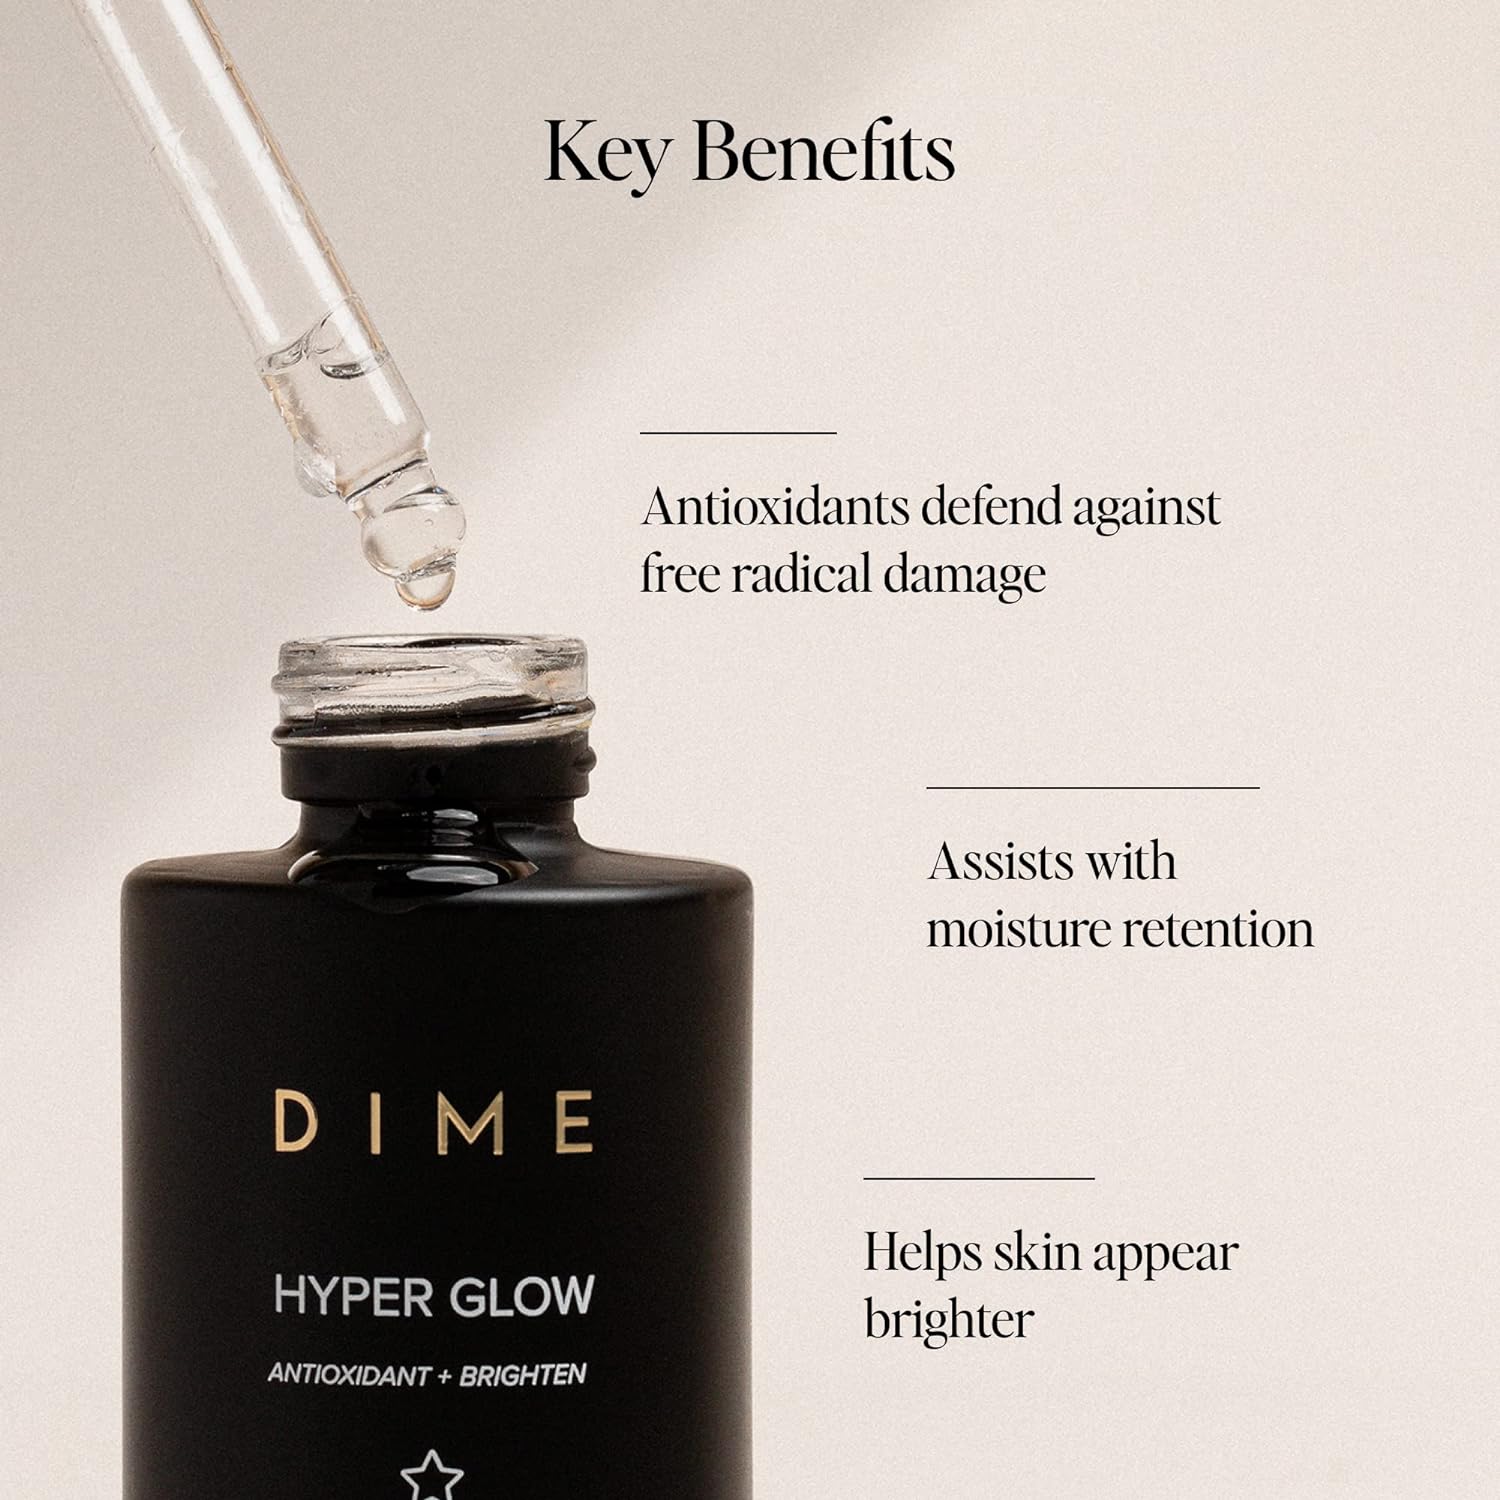 Dime Beauty Hyper Glow Serum bottle and key benefits poster